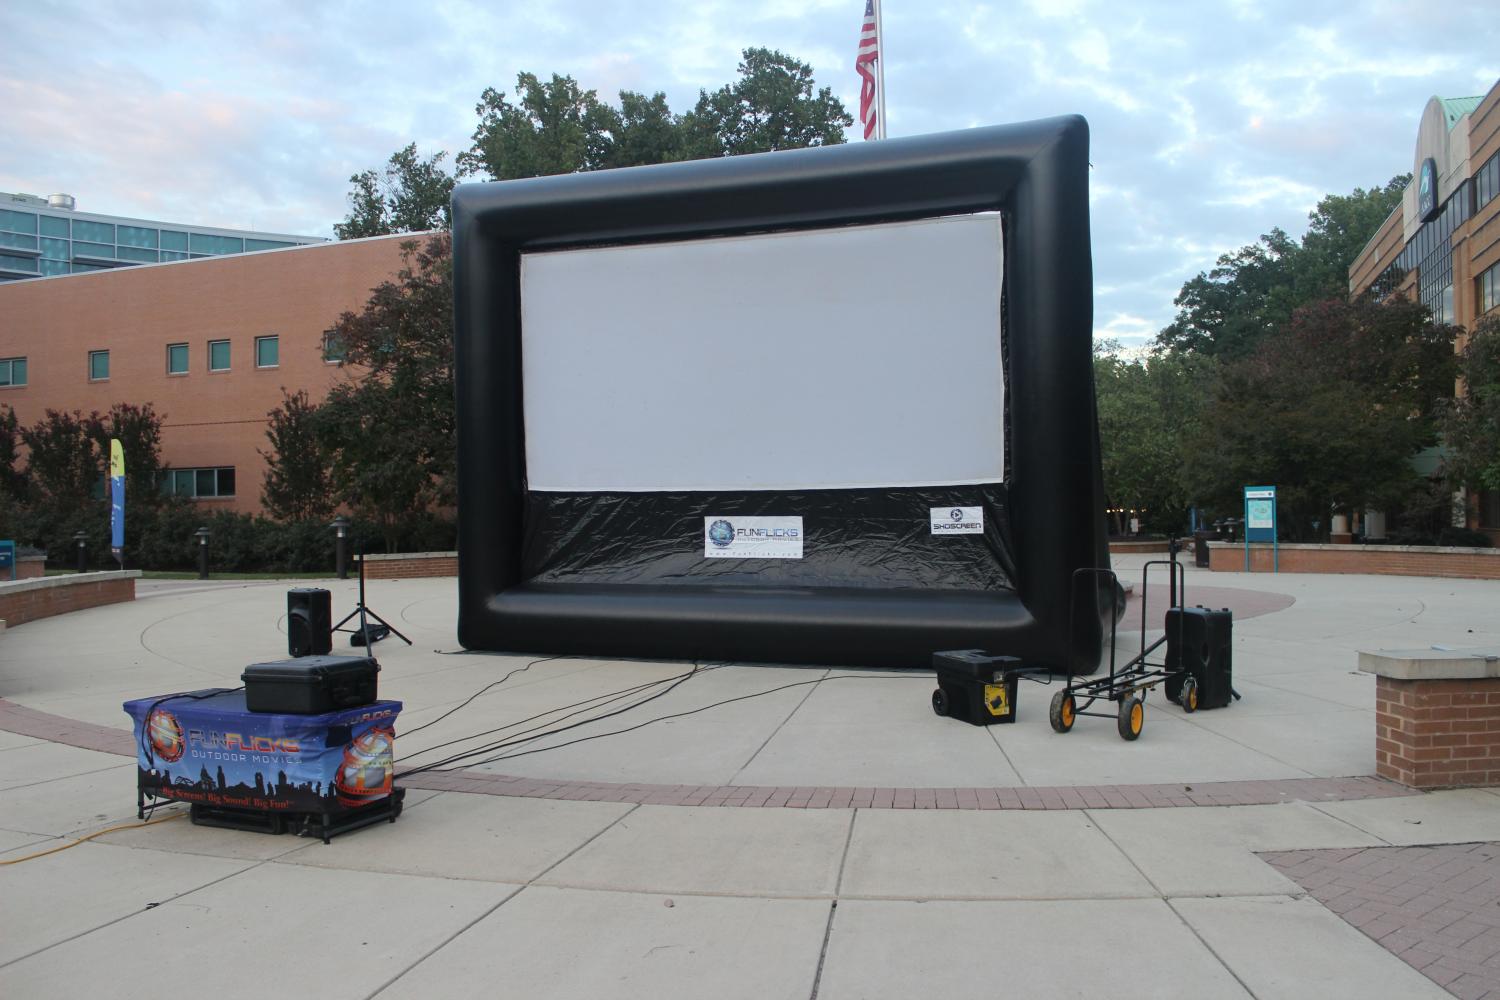 The Princess Bride was screened on an inflatable screen over at West Campus. 